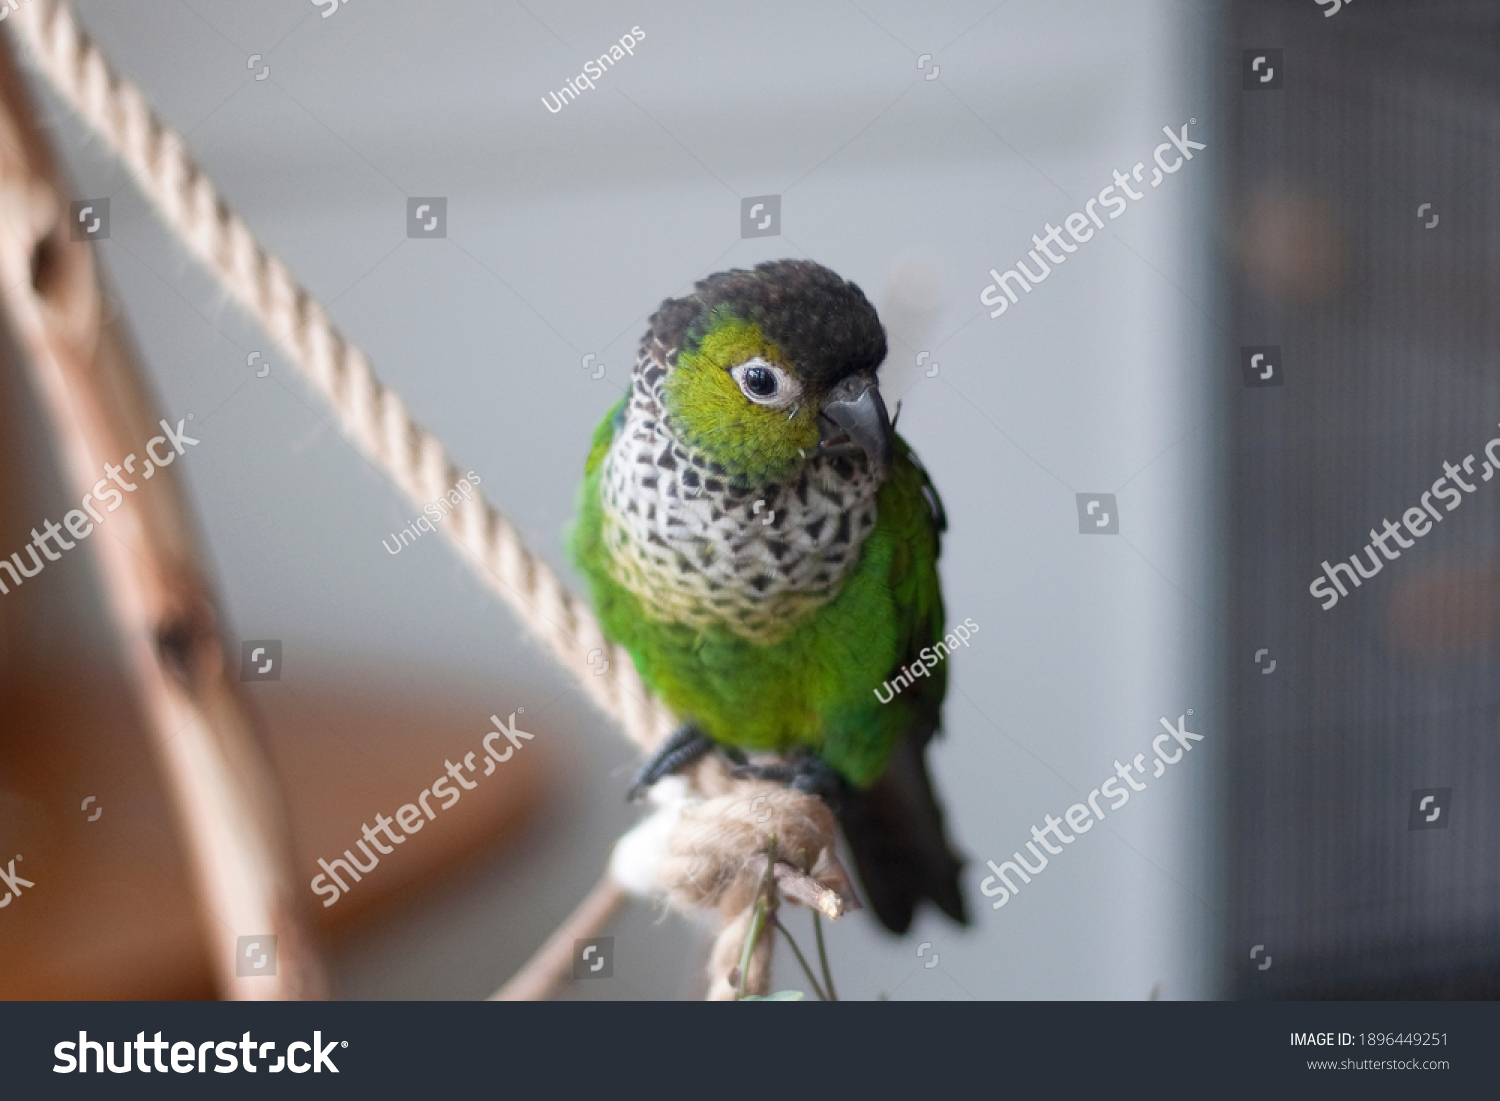 Cute Black Capped Conure Playing on a tree perch #1896449251